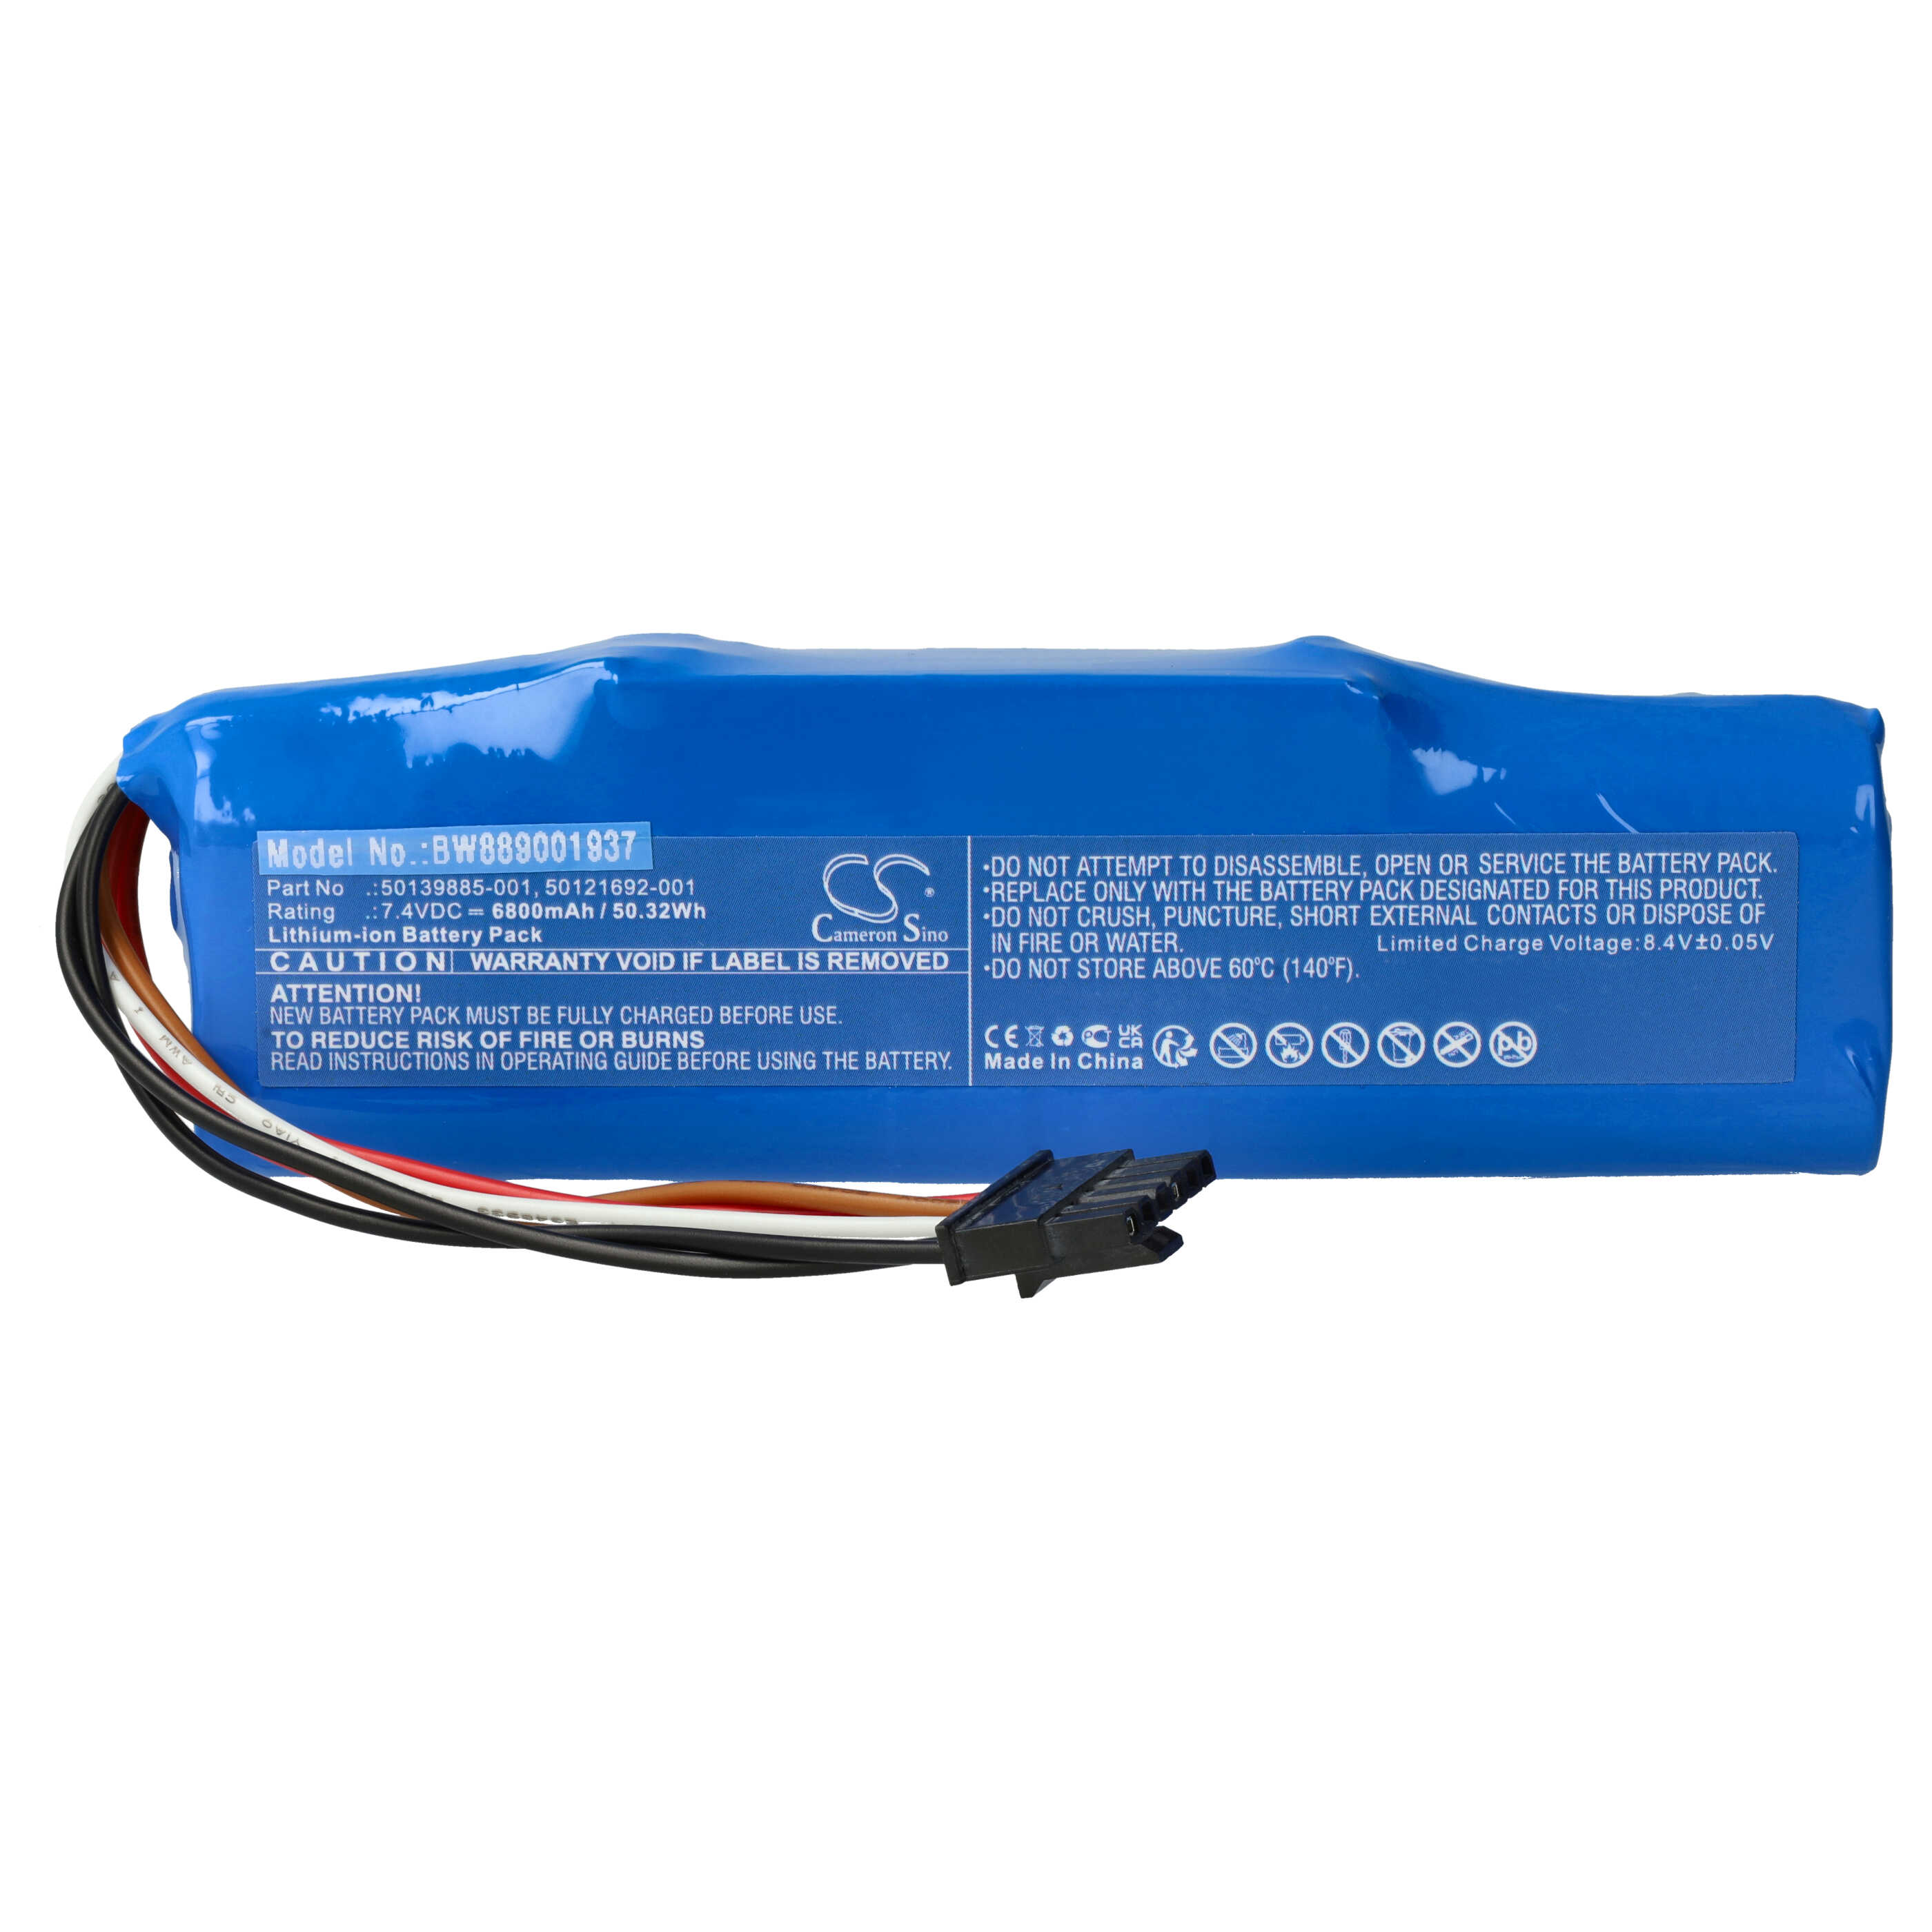 Mobile PC Battery Replacement for Honeywell 50139885-001, L3-52301624A-R, 50121692-001 - 6800mAh 7.4V Li-ion